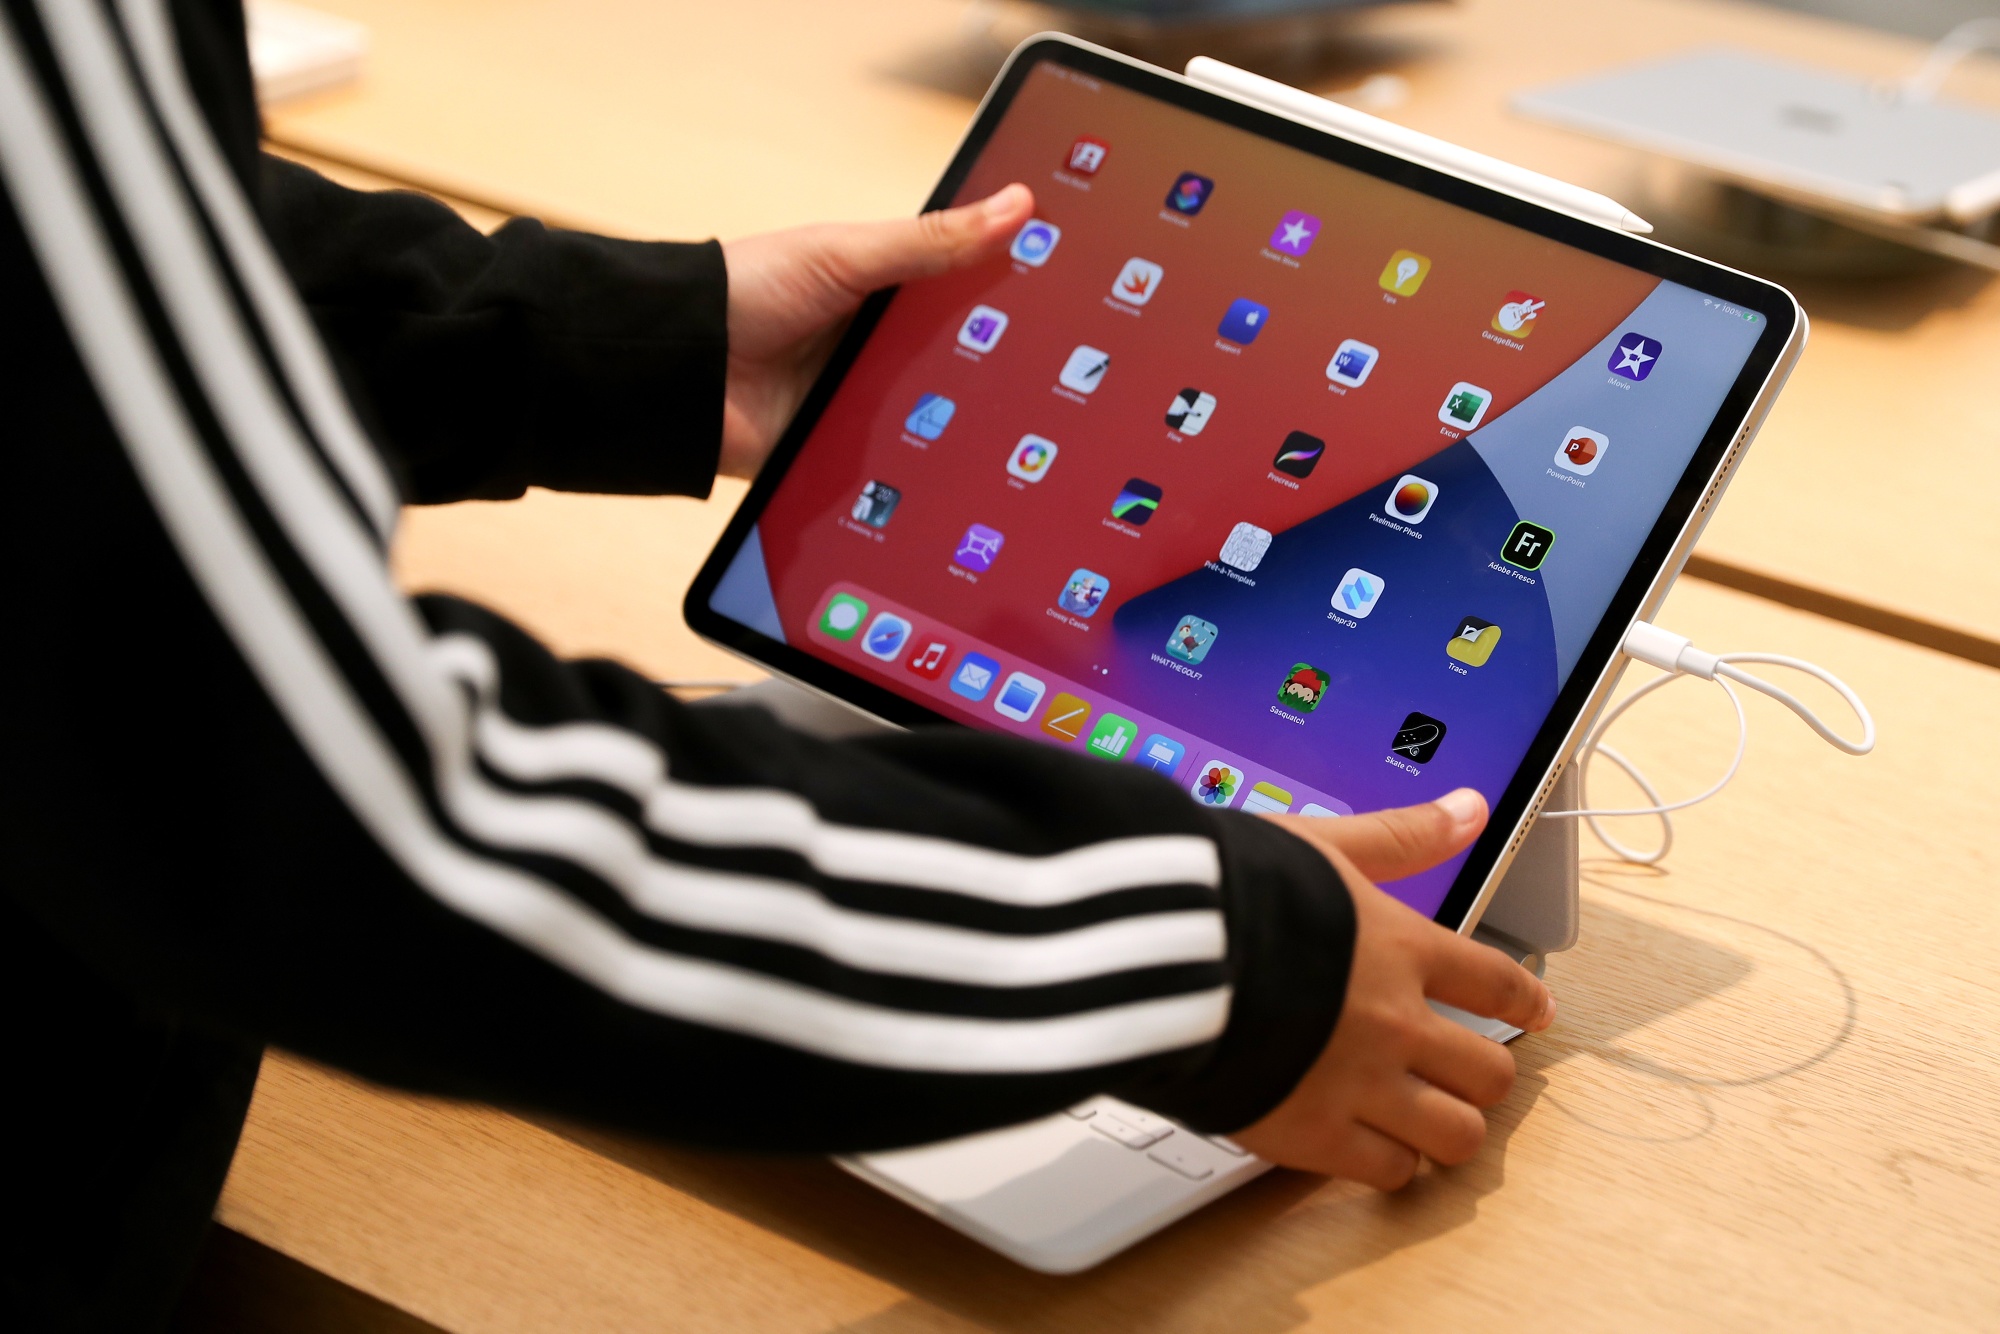 iPad Pro: Possible Features and Performance